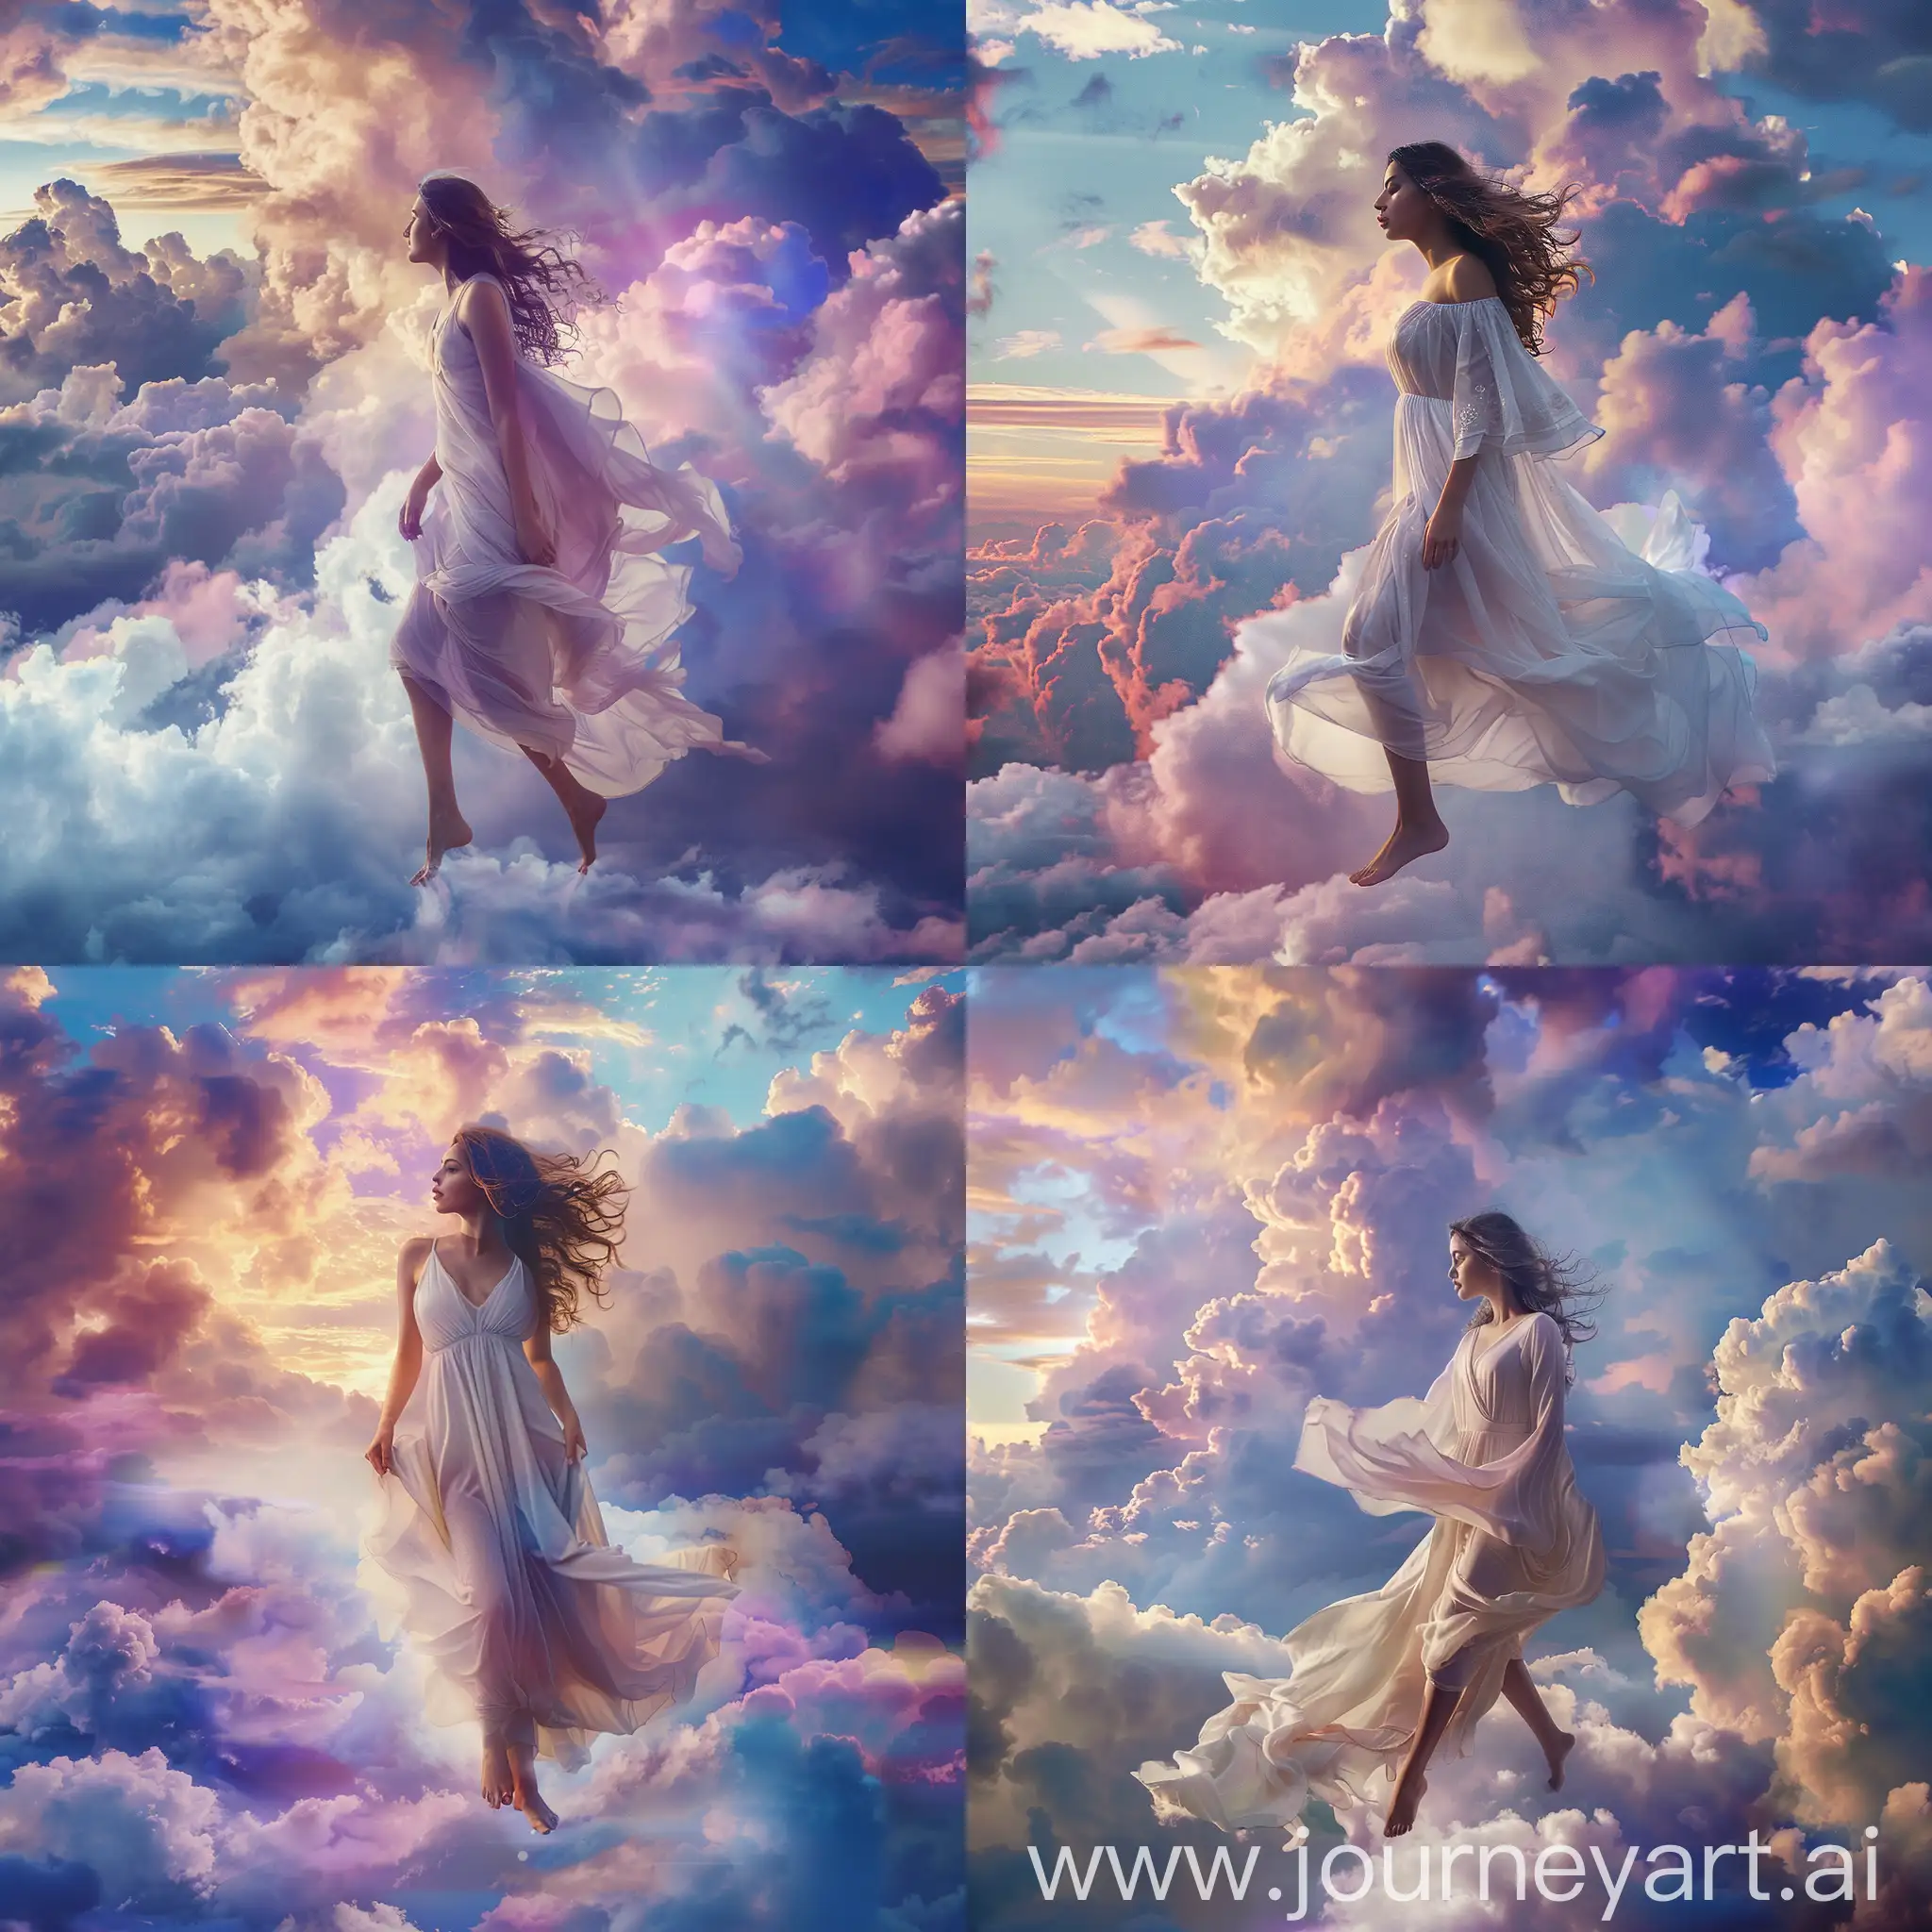 A captivating cinematic photo of a stunning muslimah with gorgeous loosely dress, walking barefoot on a layer of fluffy clouds. She is dressed in a flowing white gown that seems to blend with the clouds, giving an ethereal and surreal feel. The sky above her is a mix of vibrant blues and purples, with the sun casting a warm glow. The composition creates a sense of wonder and freedom, as if the girl is defying gravity and walking on air. photo, cinematic